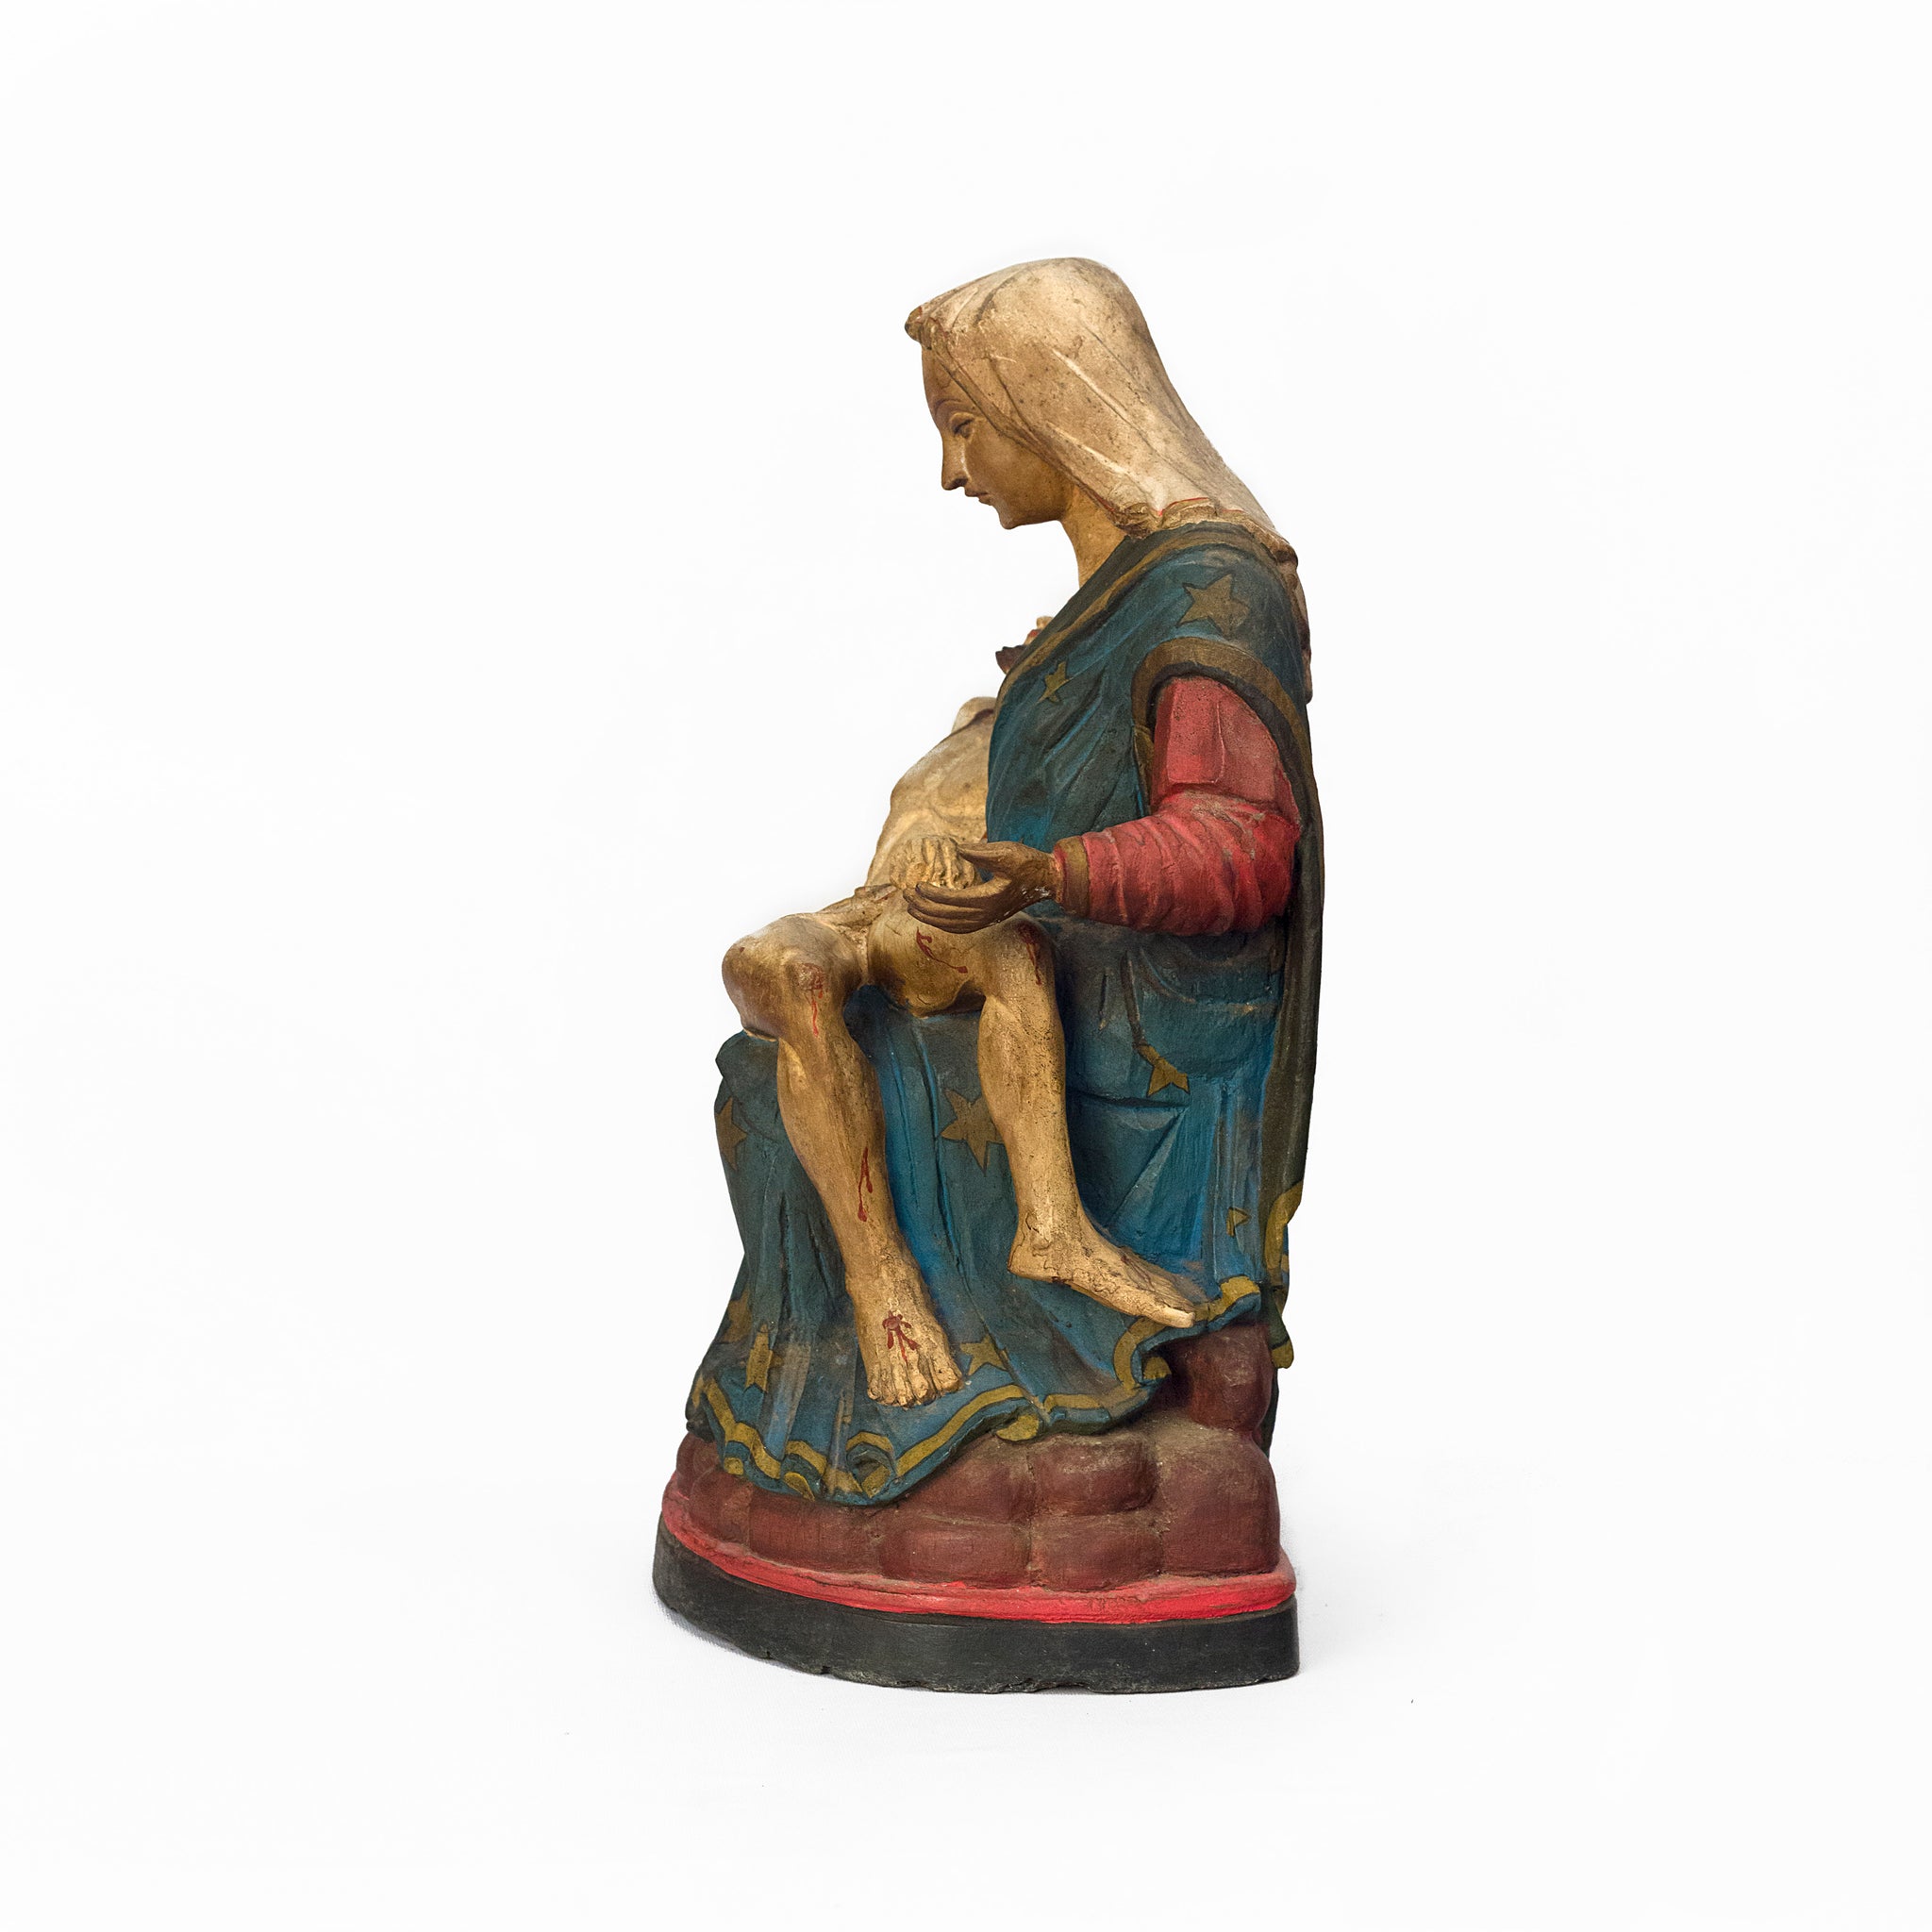 WOODEN IDOL OF MOTHER MARY WITH JESUS